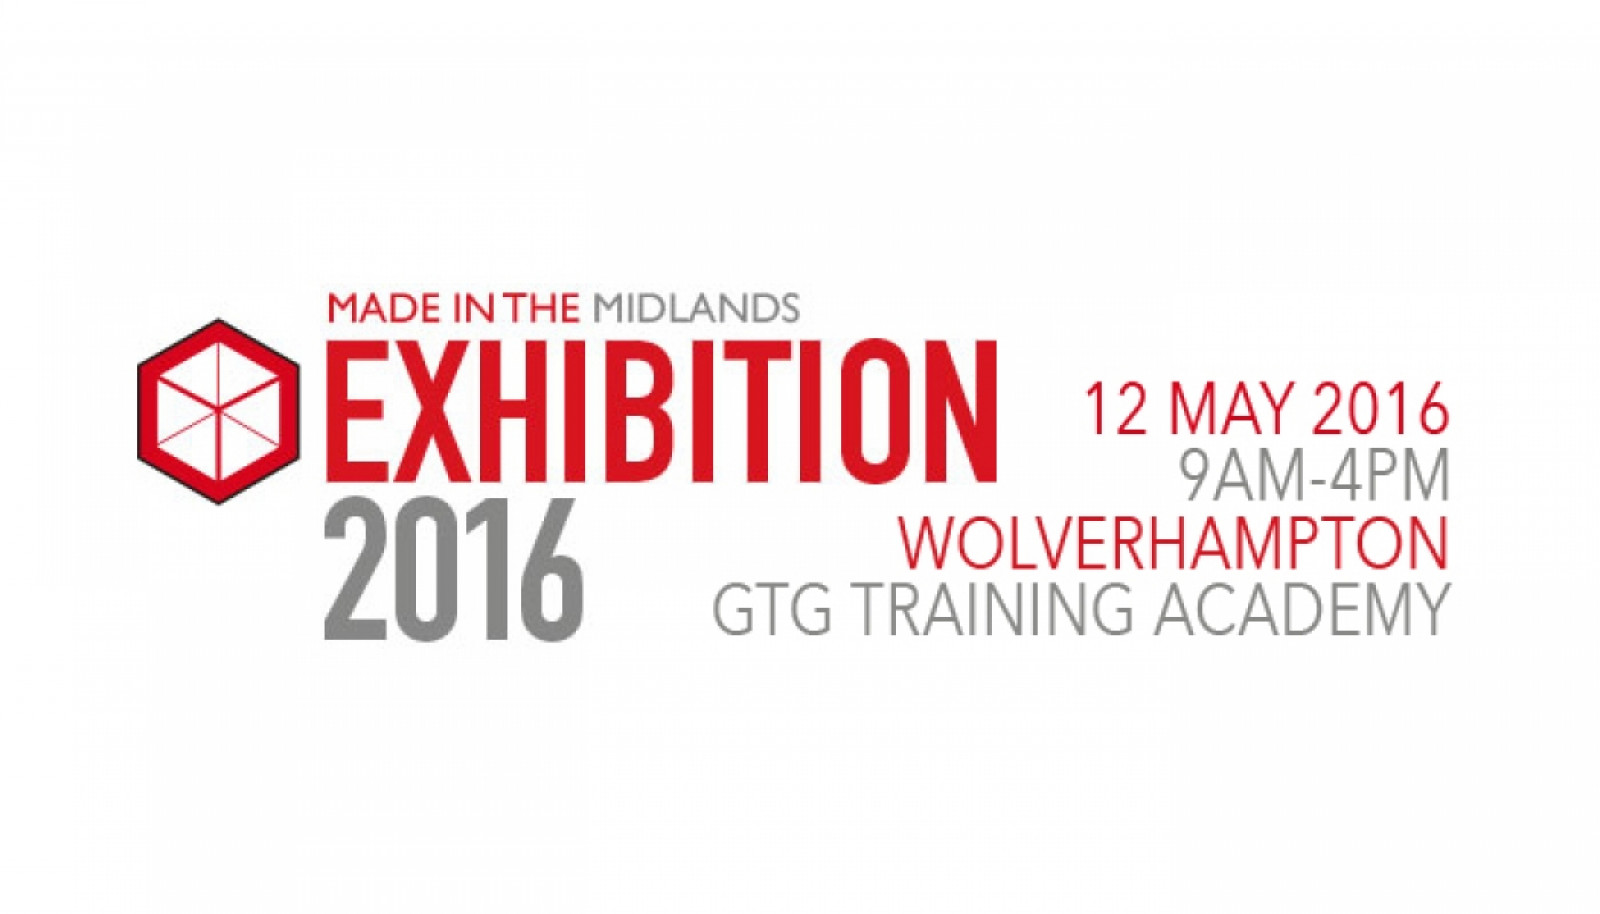 MiM Exhibition 2016 to be held at GTG Training Aca...